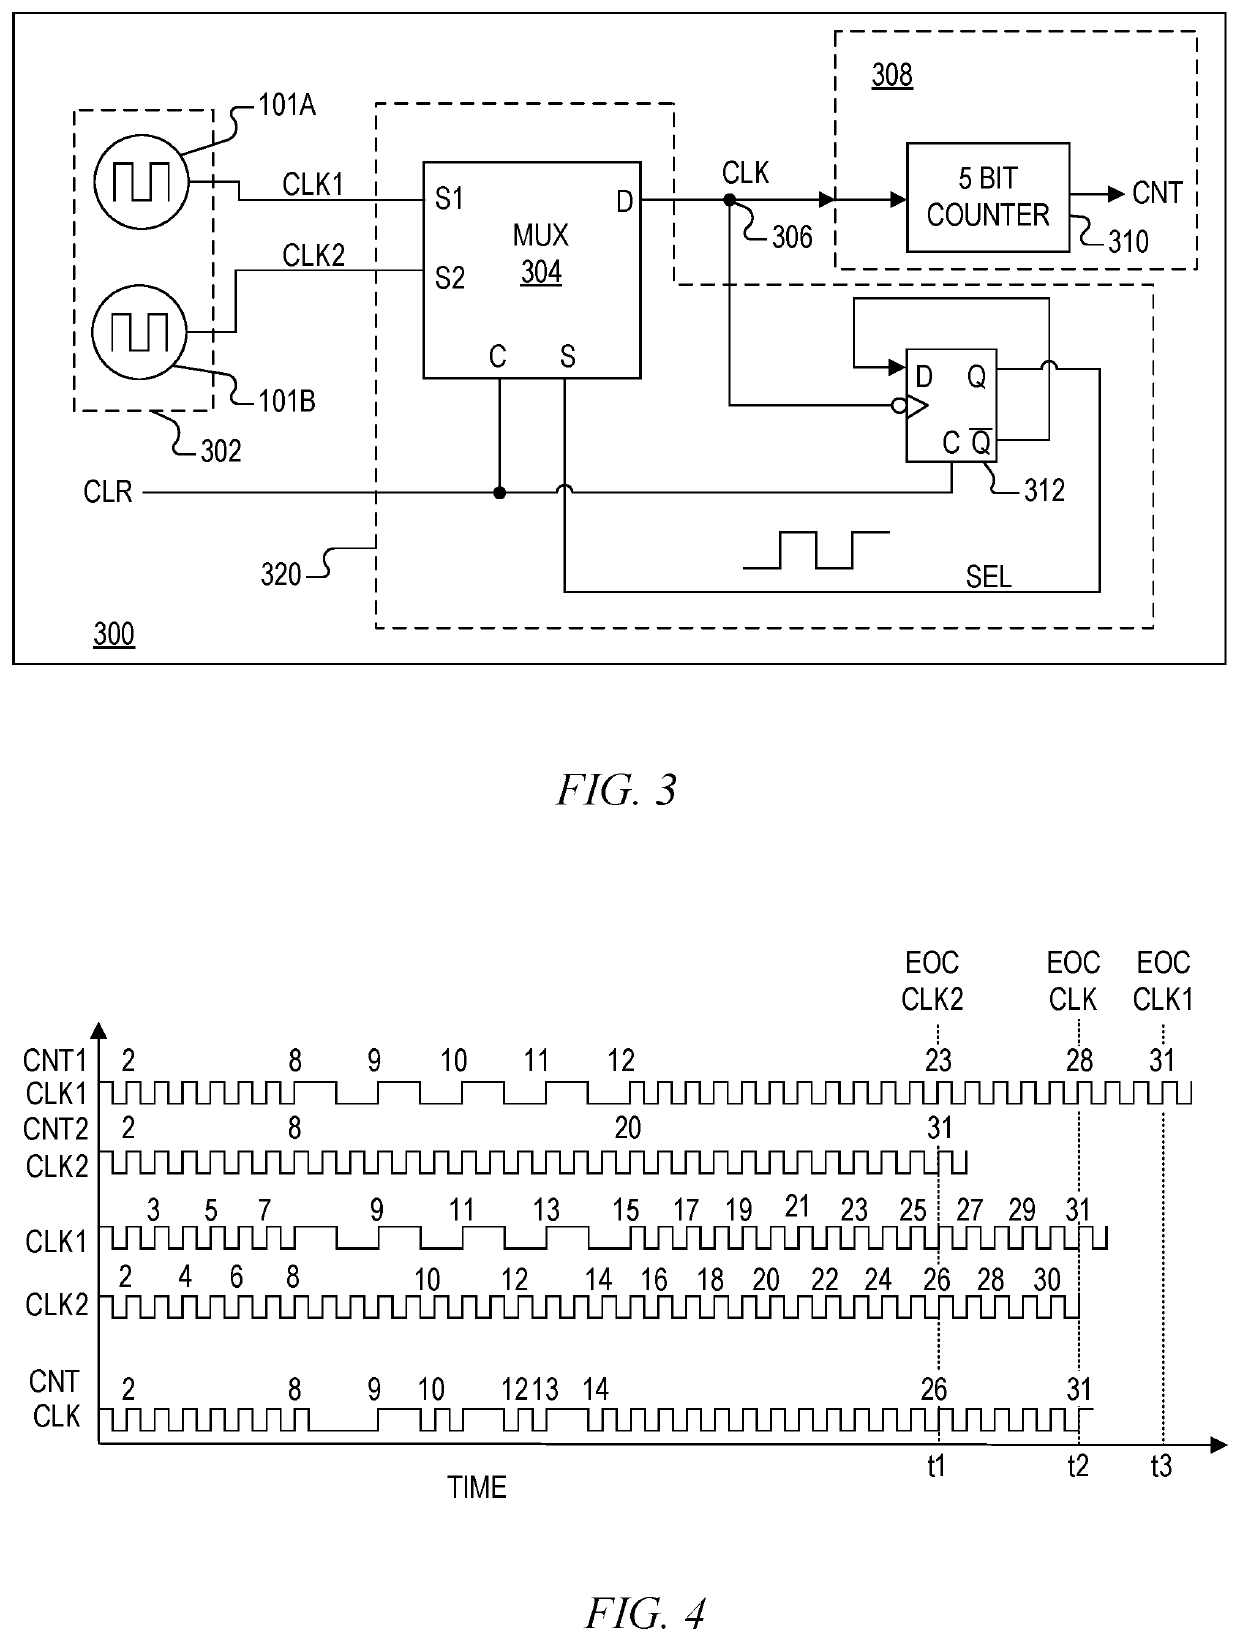 System and method of duplicate circuit block swapping for noise reduction